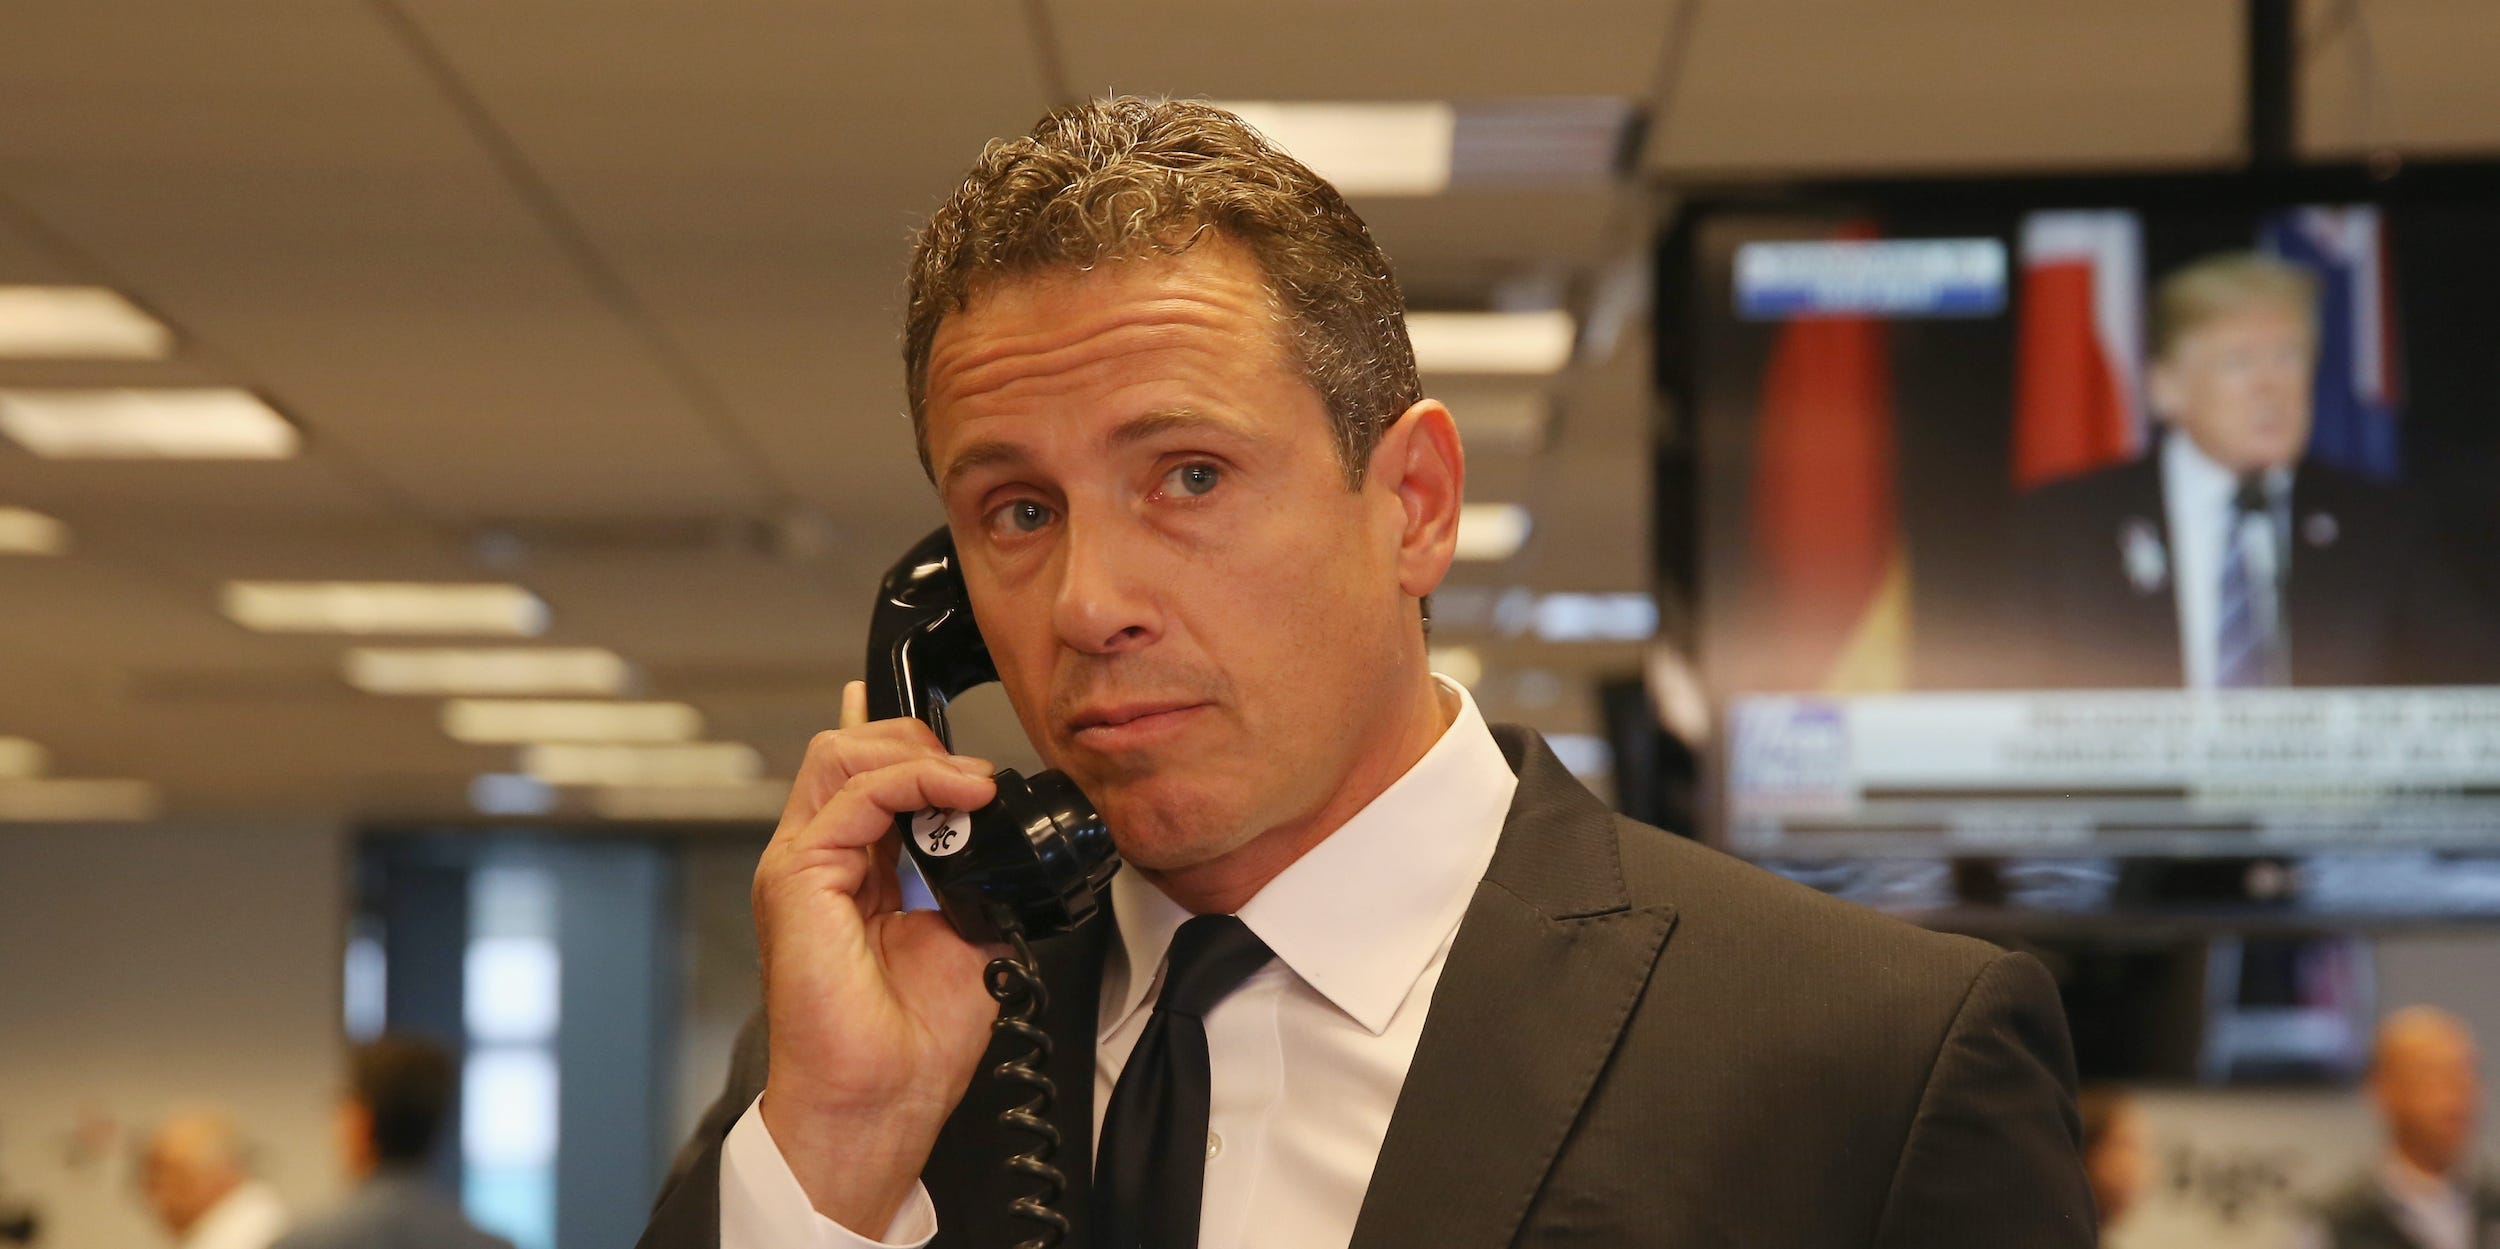 Chris Cuomo holds a landline phone to his ear, looking off to his left.